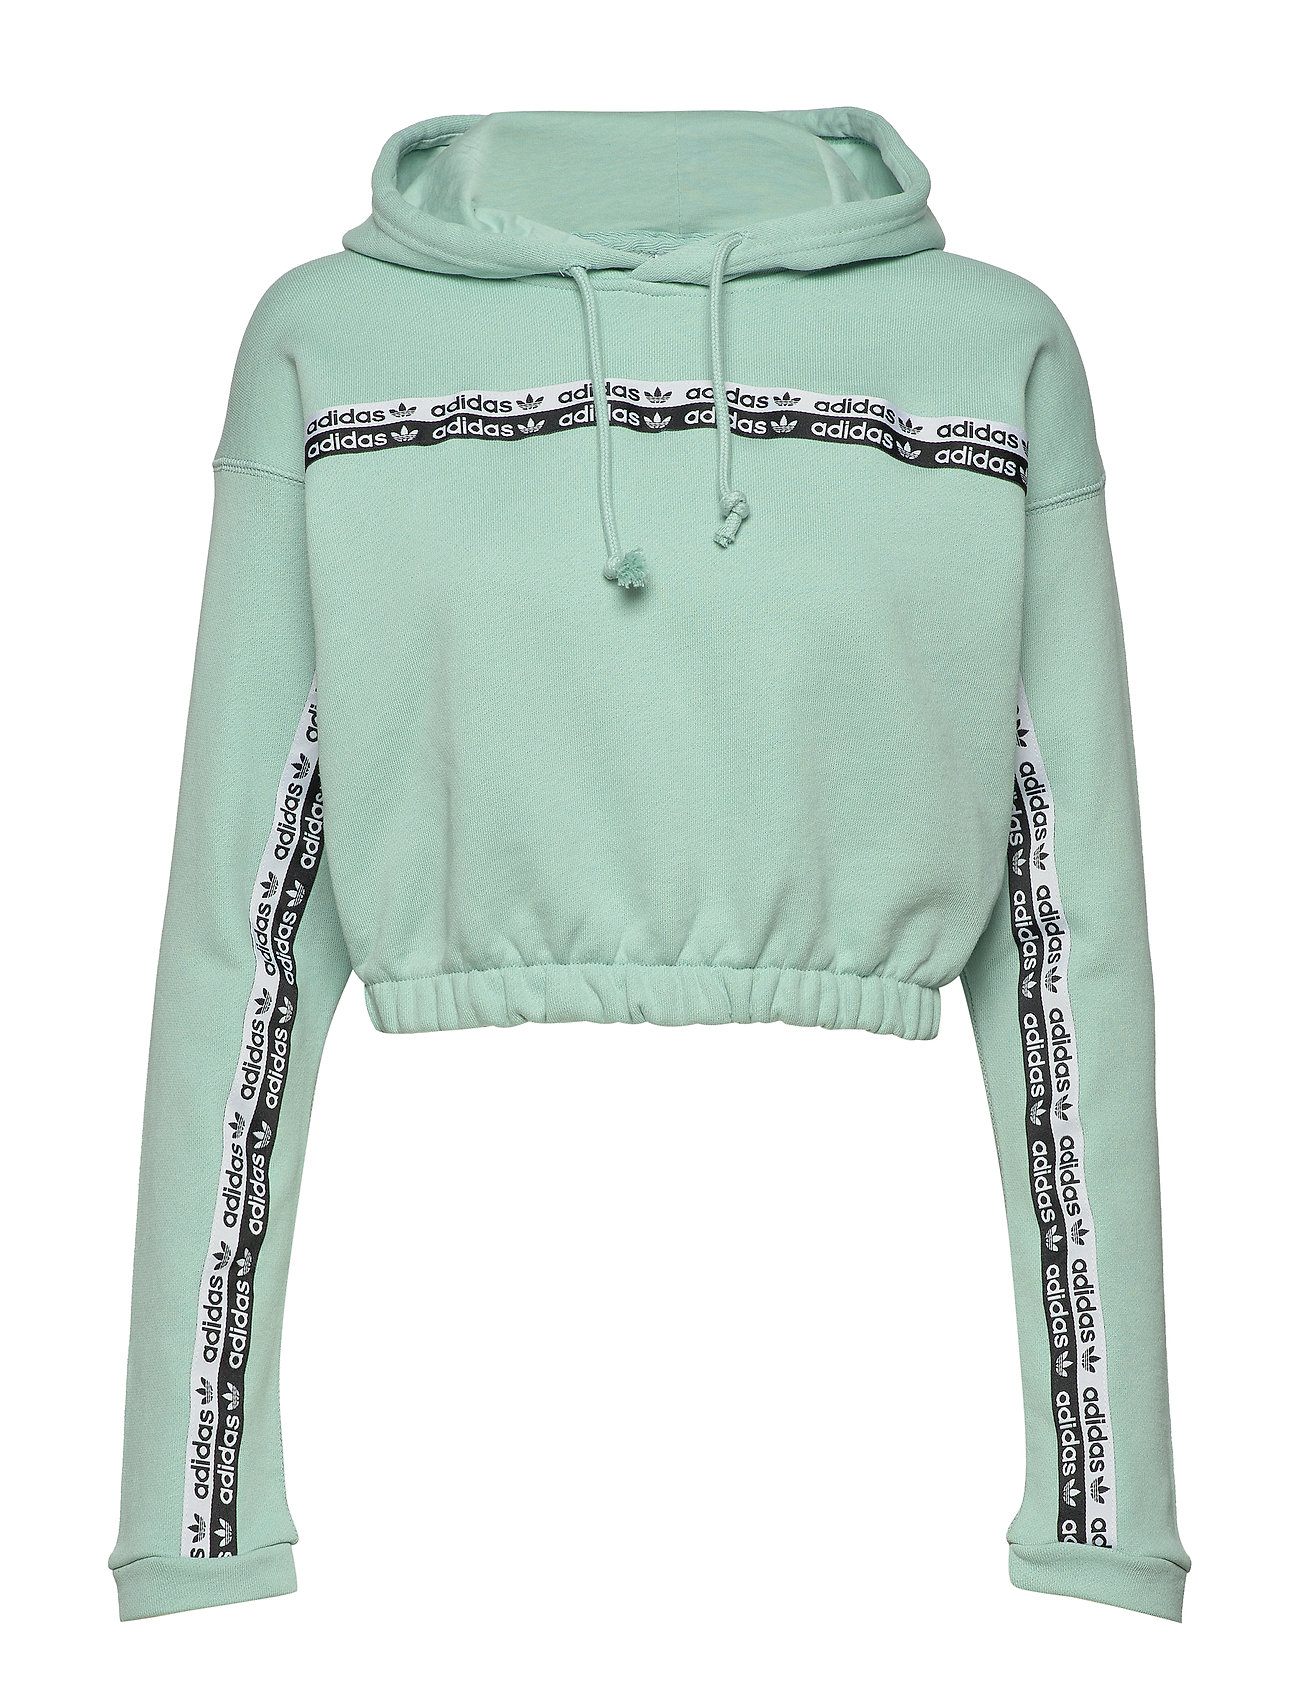 adidas outlet hoodie